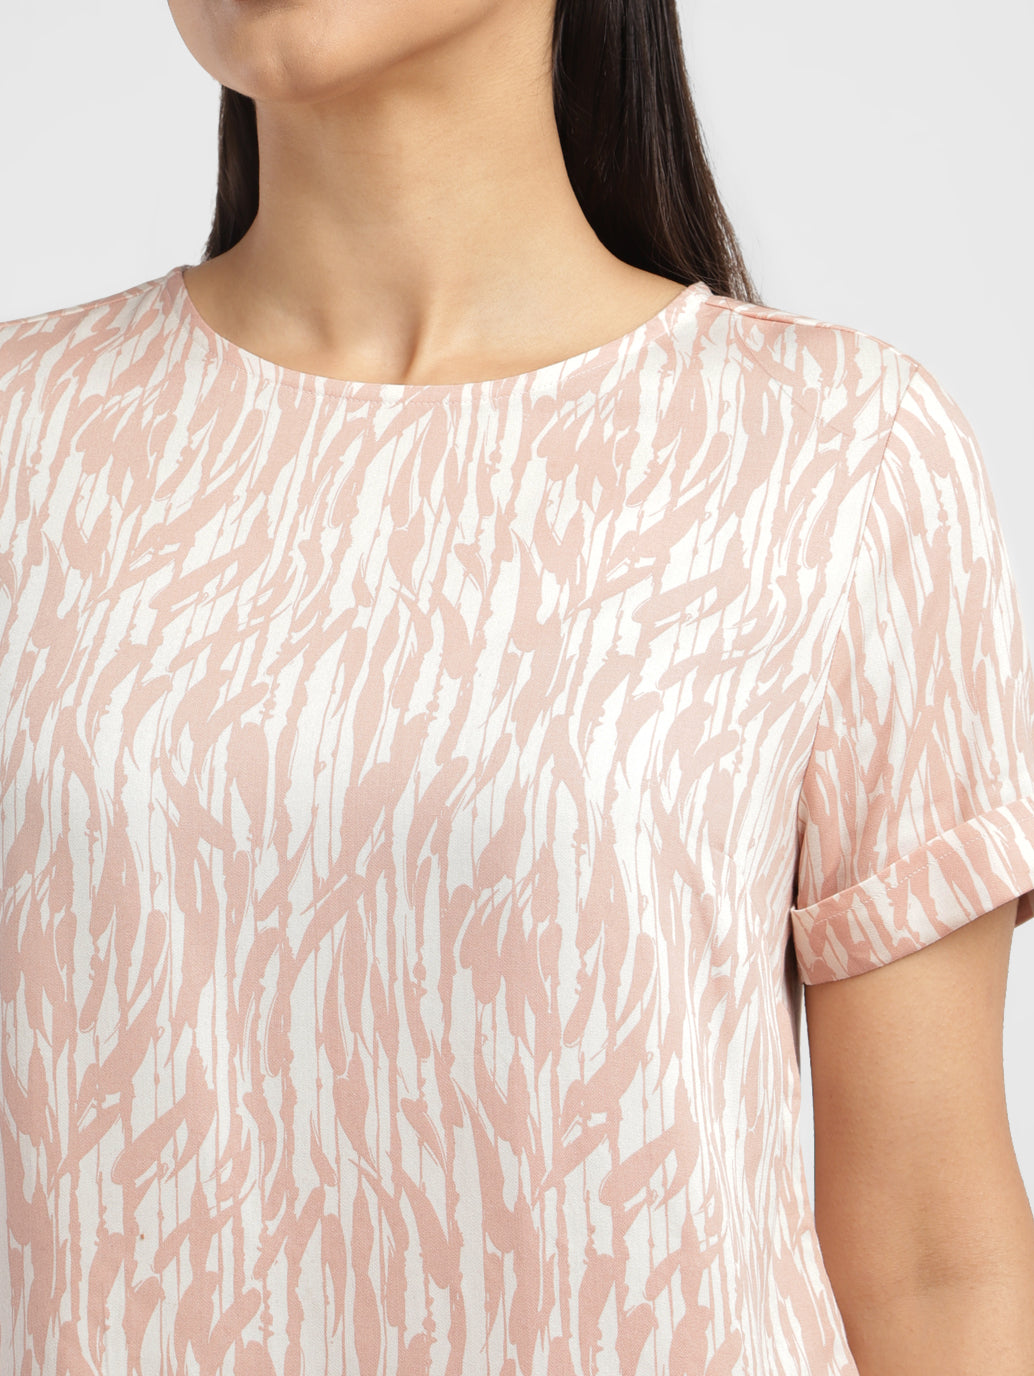 Women's Abstract Round Neck T-shirt